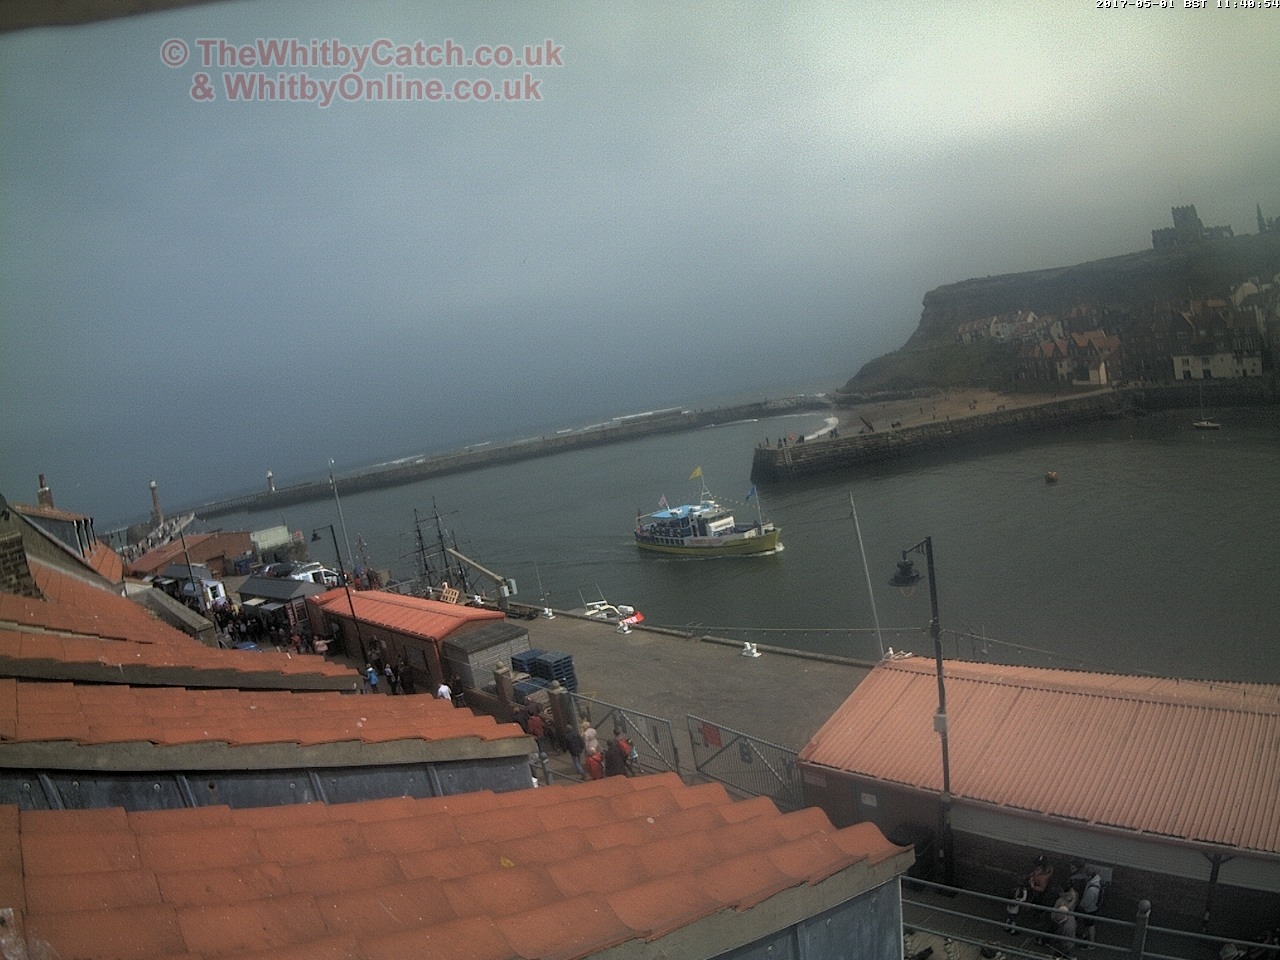 Whitby Mon 1st May 2017 11:41.